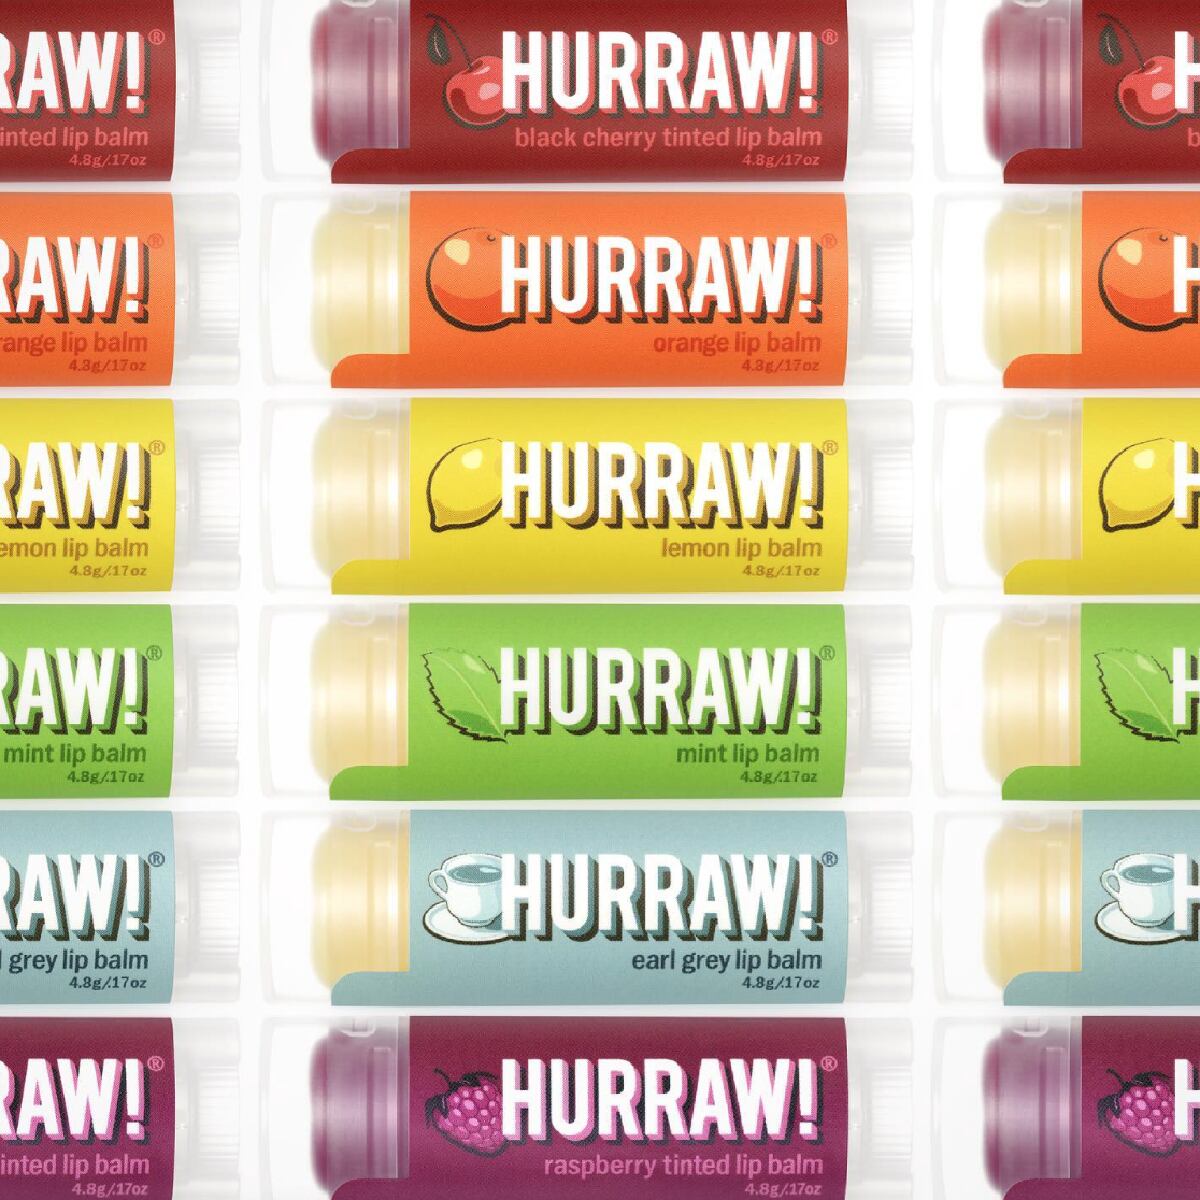 Three vertical columns of Hurraw! vegan lip balms in rainbow color against a white background. 